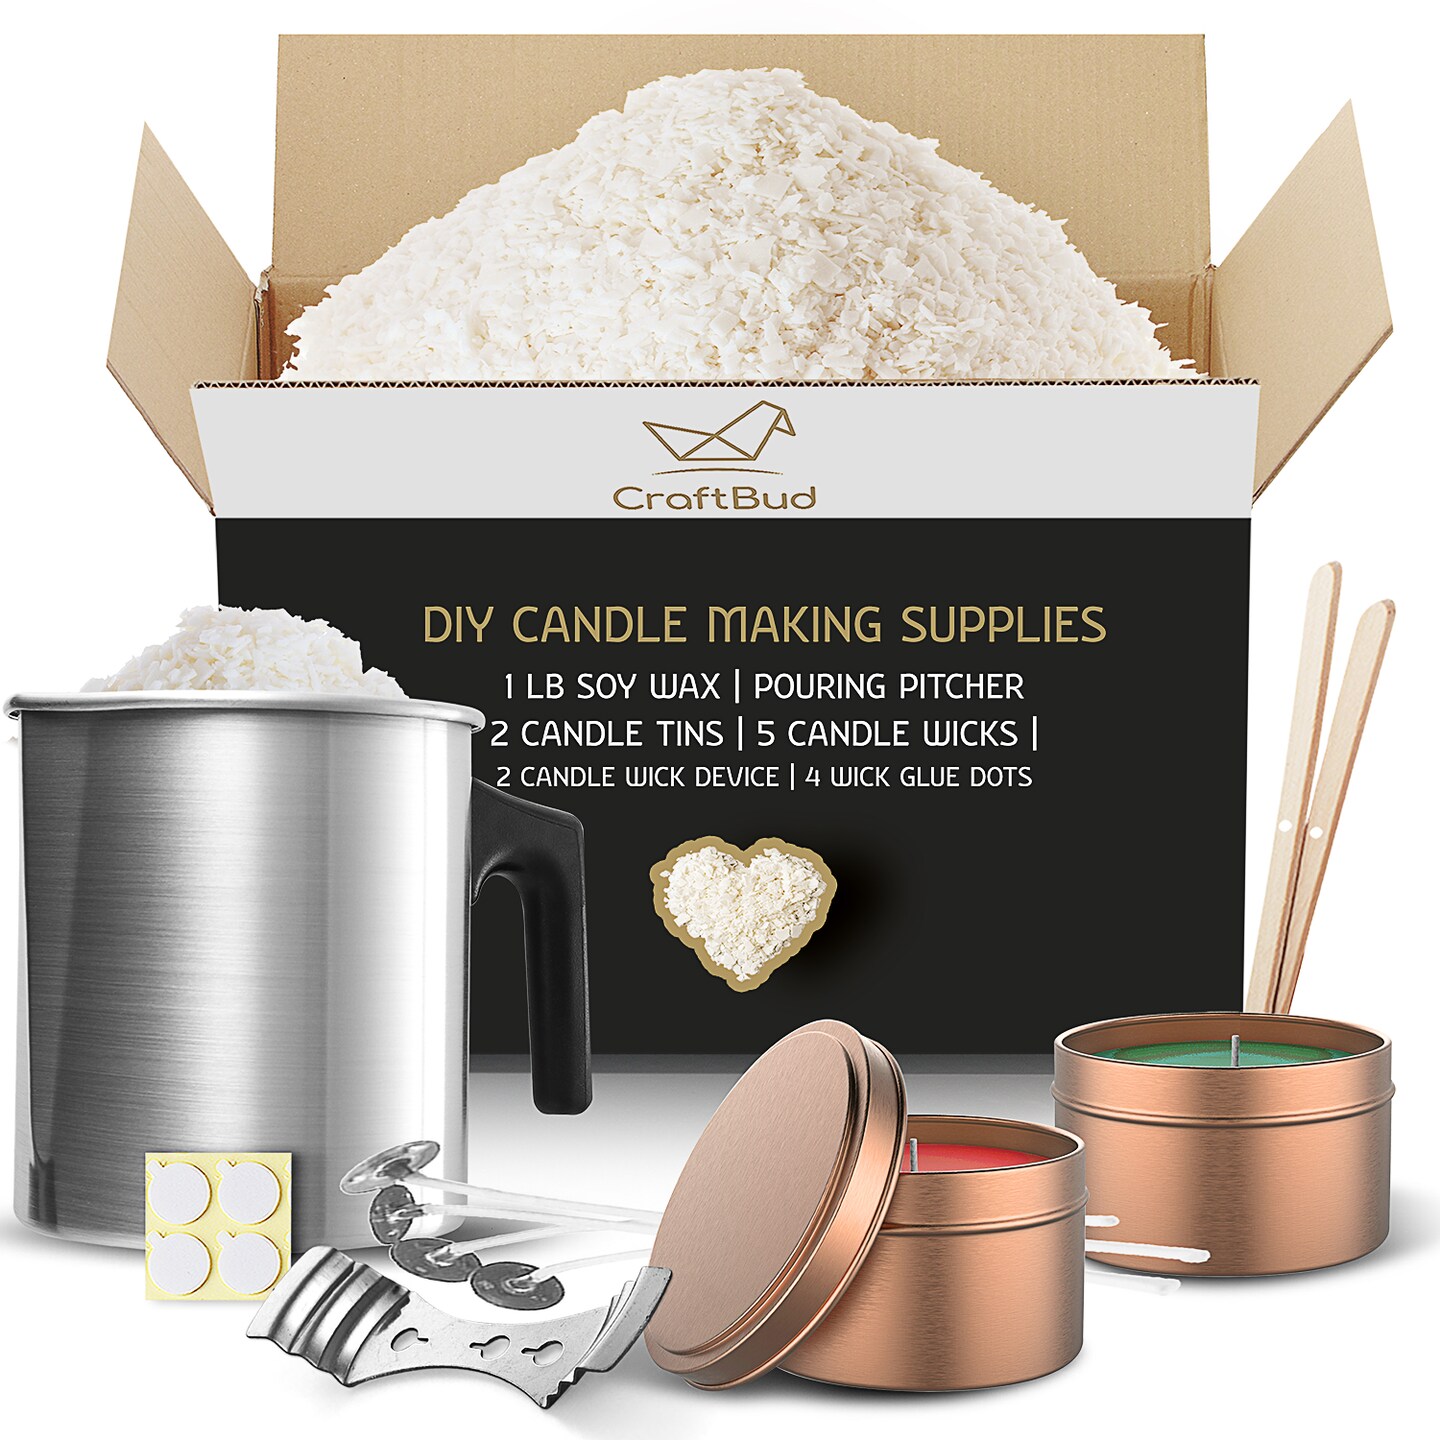 etuolife Complete Candle Making Kits for Adults Beginners,DIY Candle Making  Supplies Include Soy Wax,Wax Melter,Scents,Dyes,Wicks,Wicks S